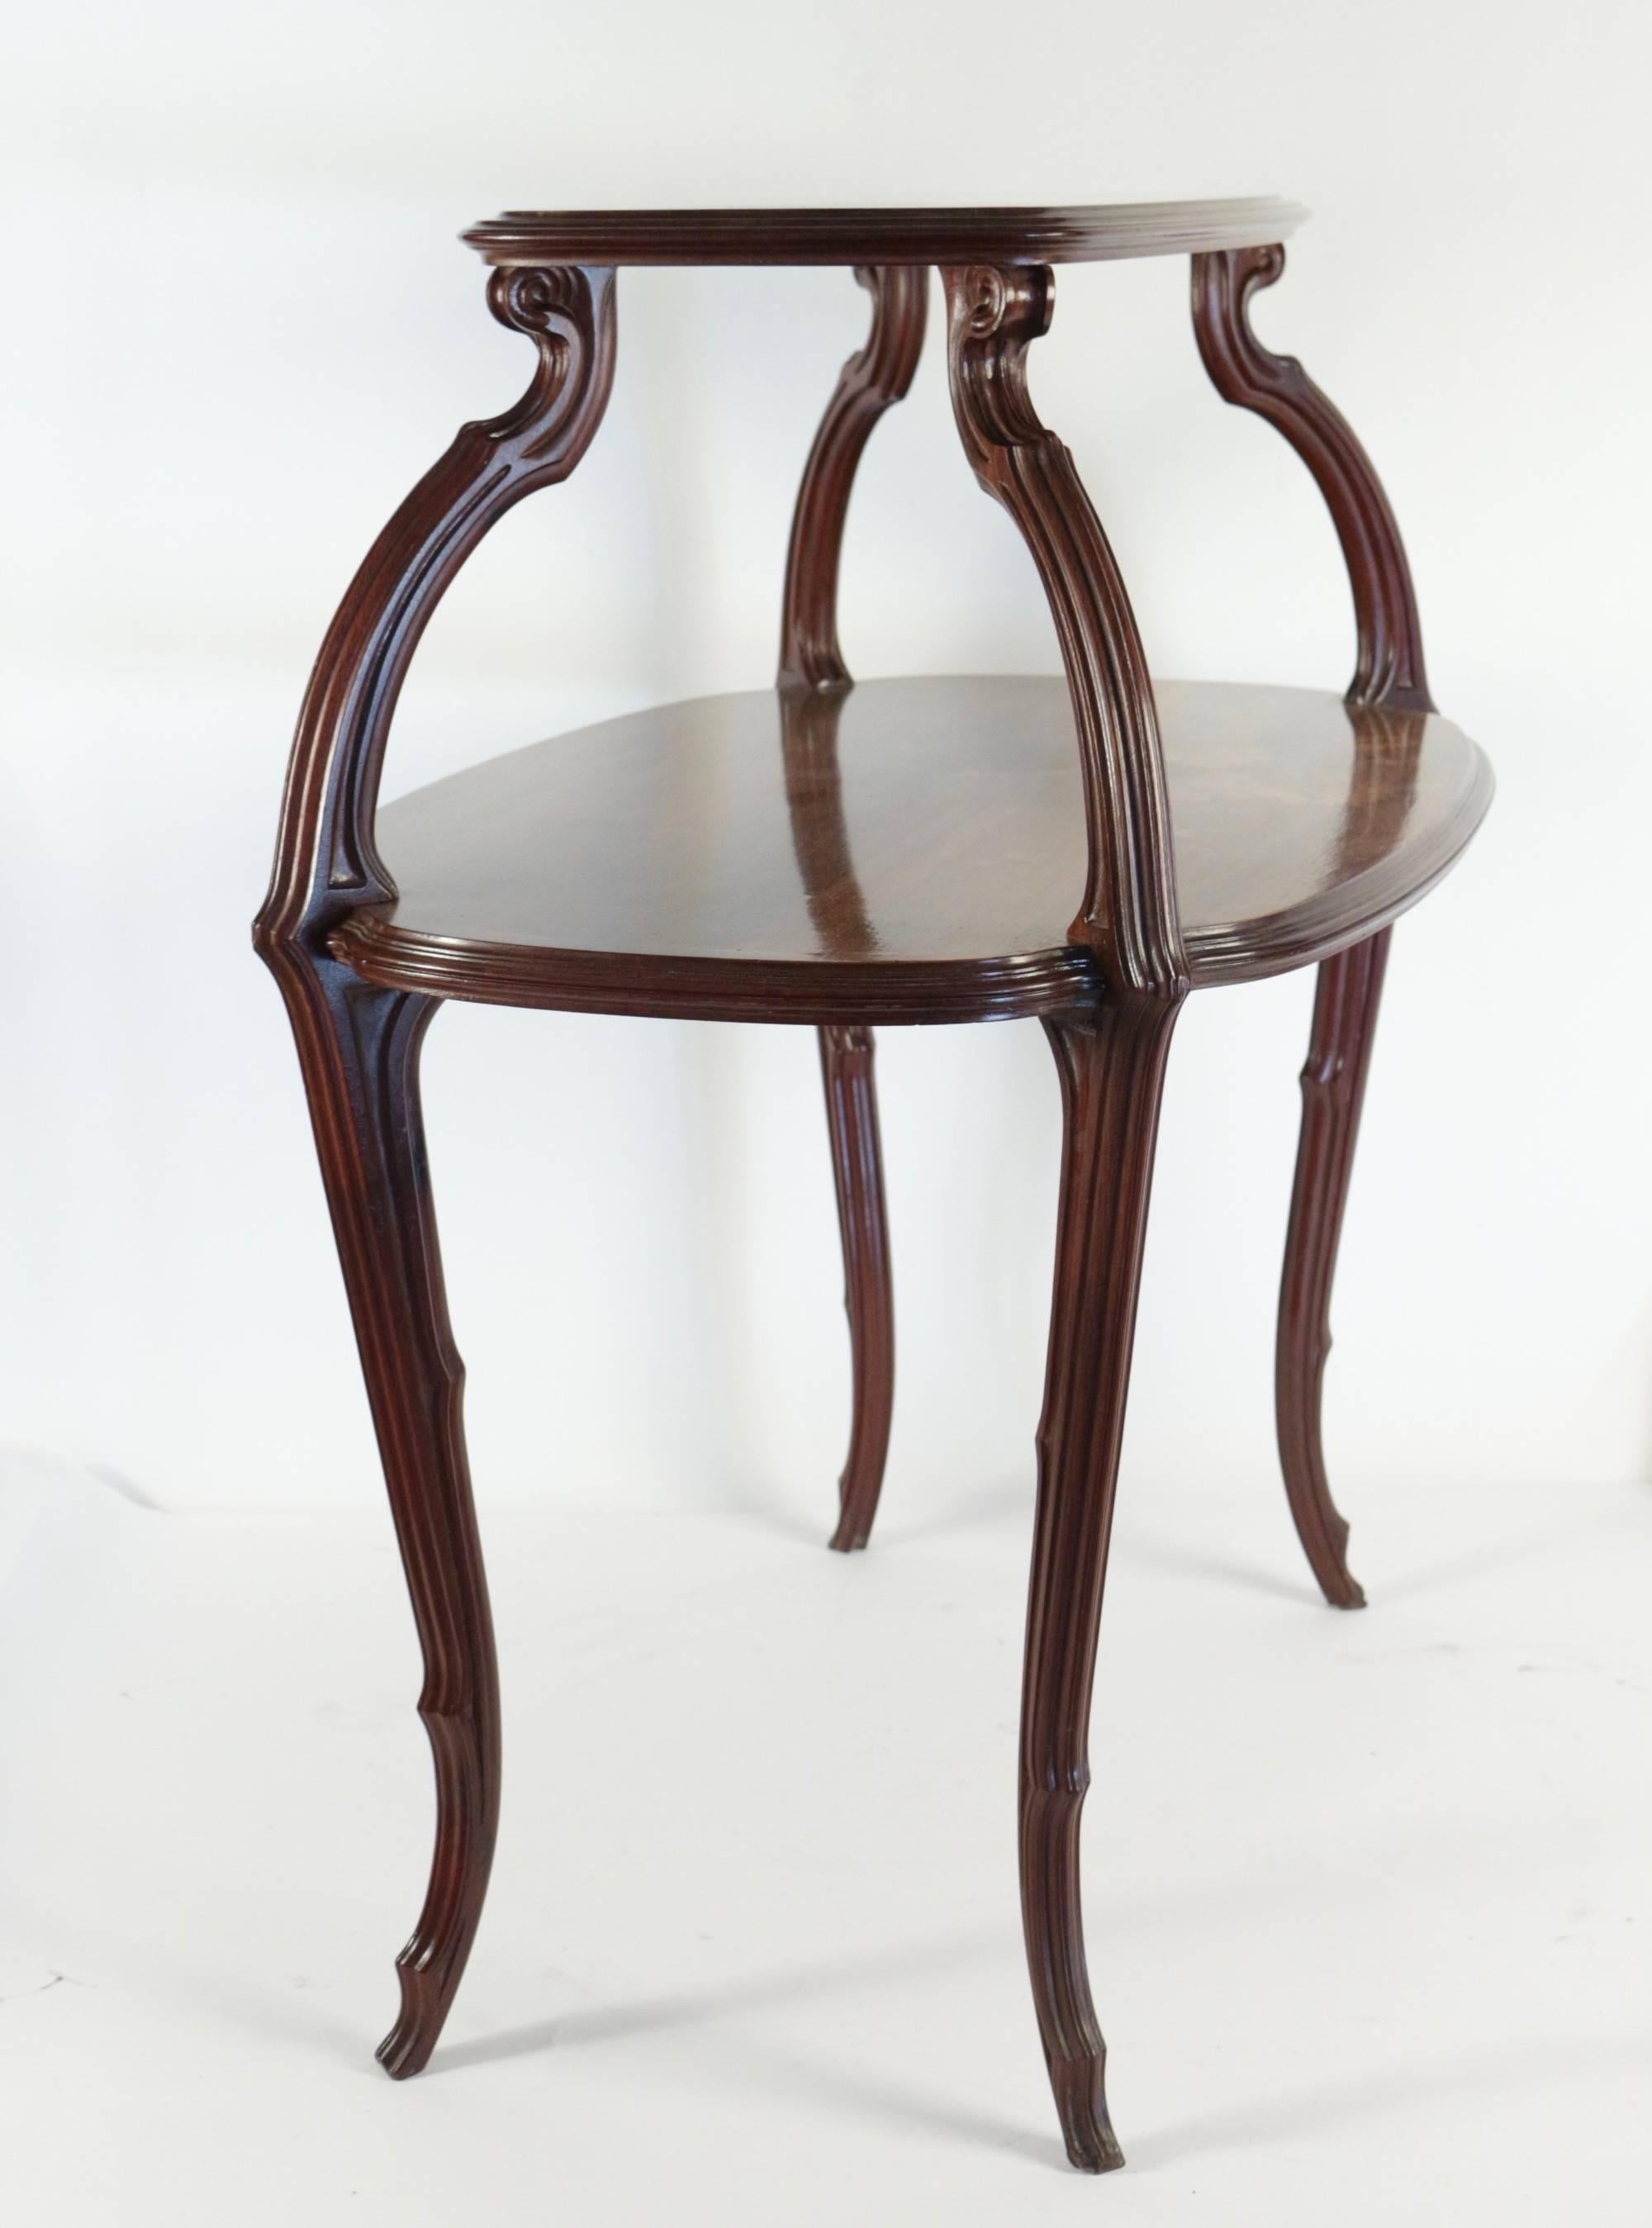 French Emile Galle Carved and Marquetry Side Table, circa 1900